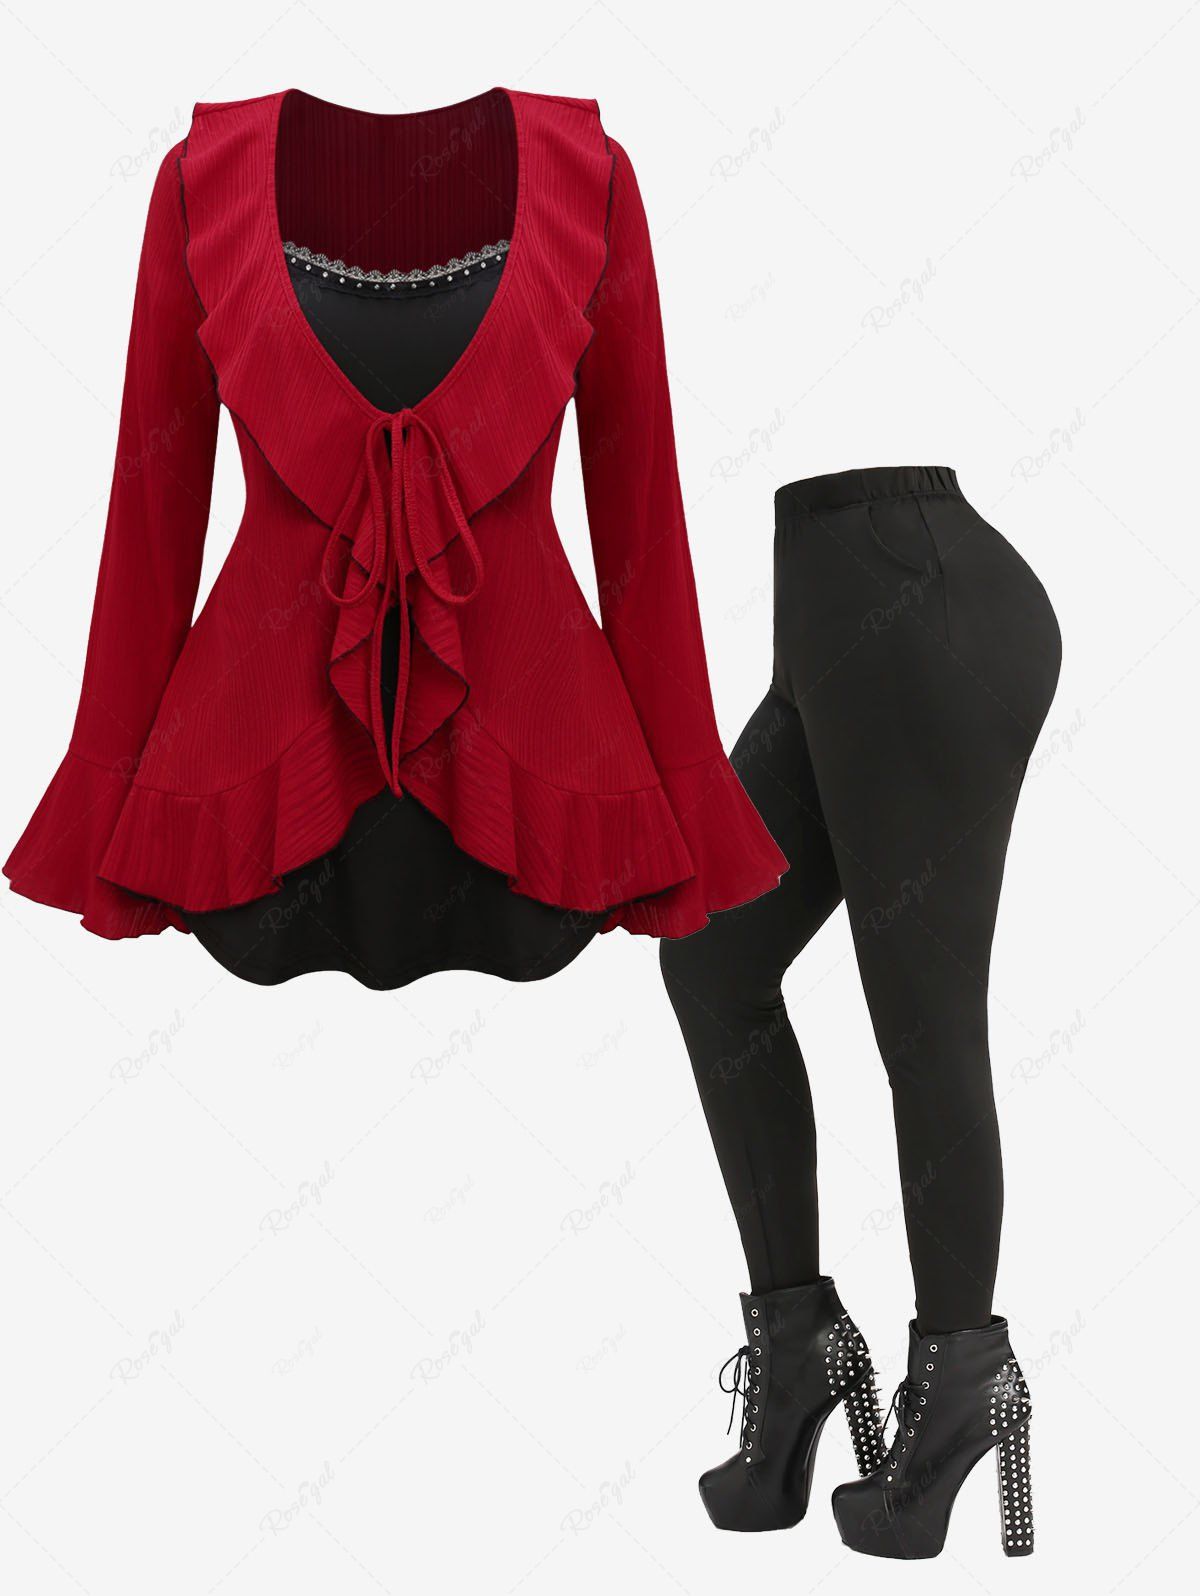 Sale Ruffles Tied Eyelash Lace Trim Rivet 2 In 1 T-shirt and Pockets Fleece Leggings Plus Size Outfit  